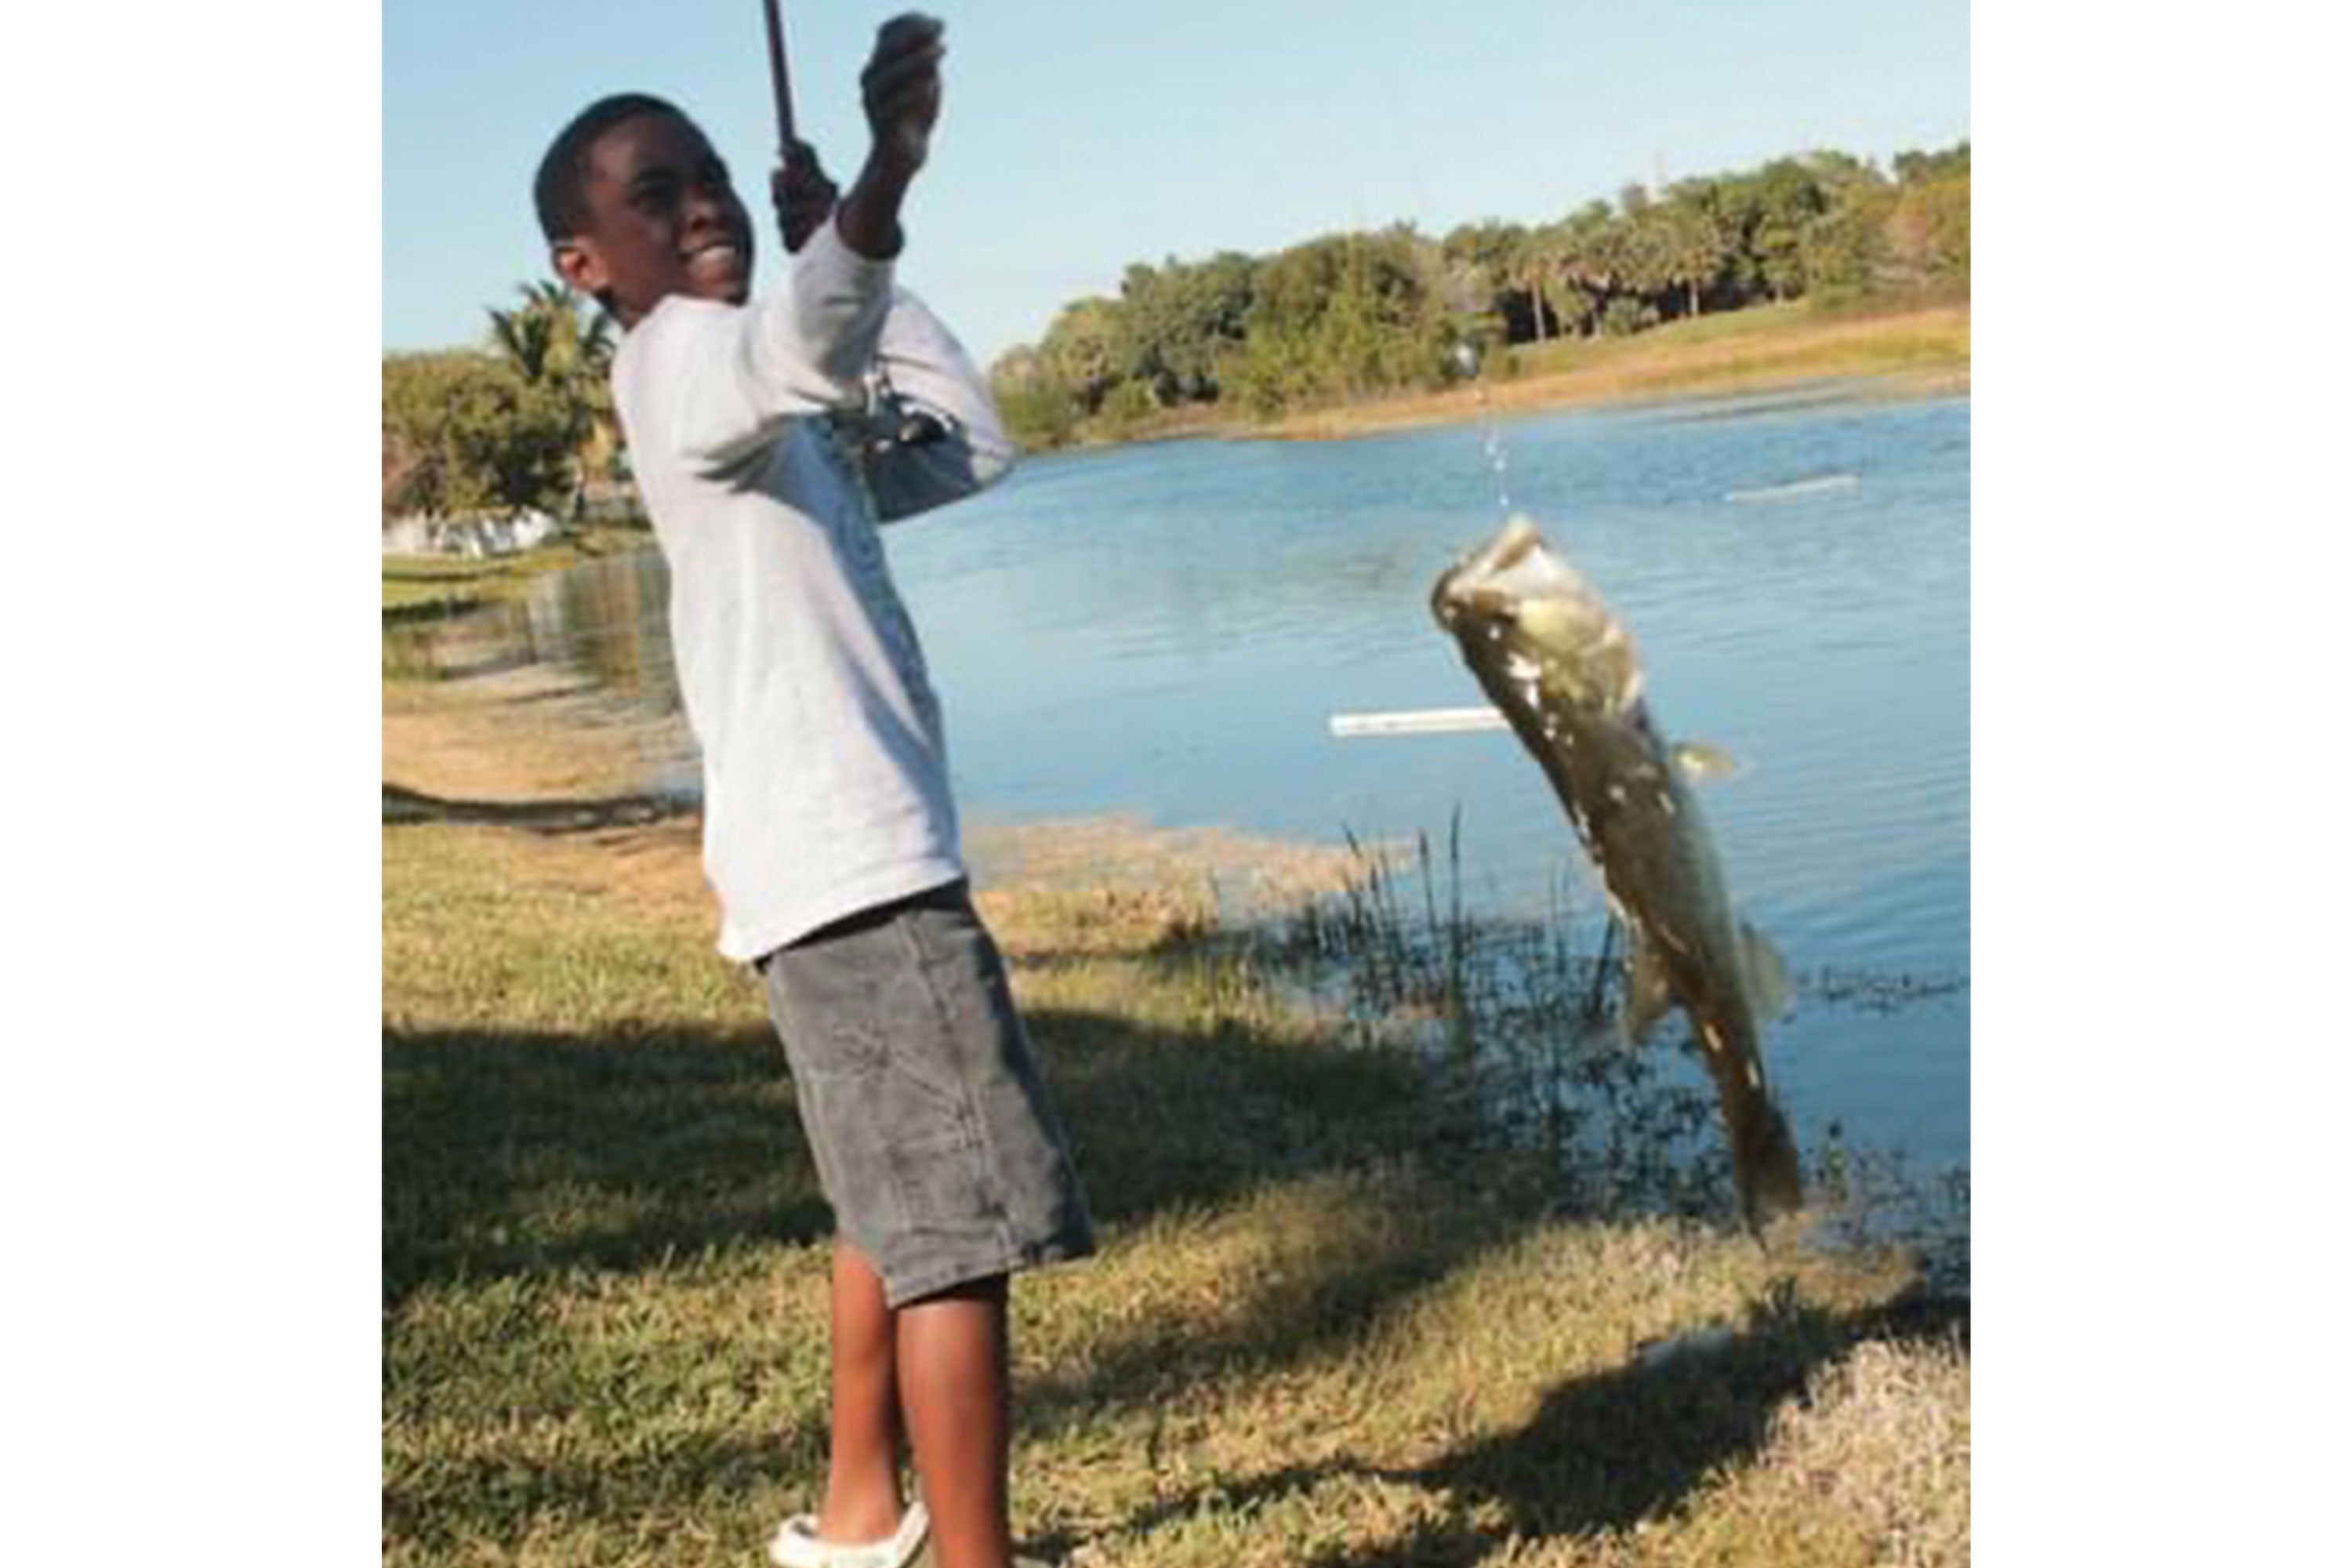 Emmanuel Williams reeling in a large fish from a lake